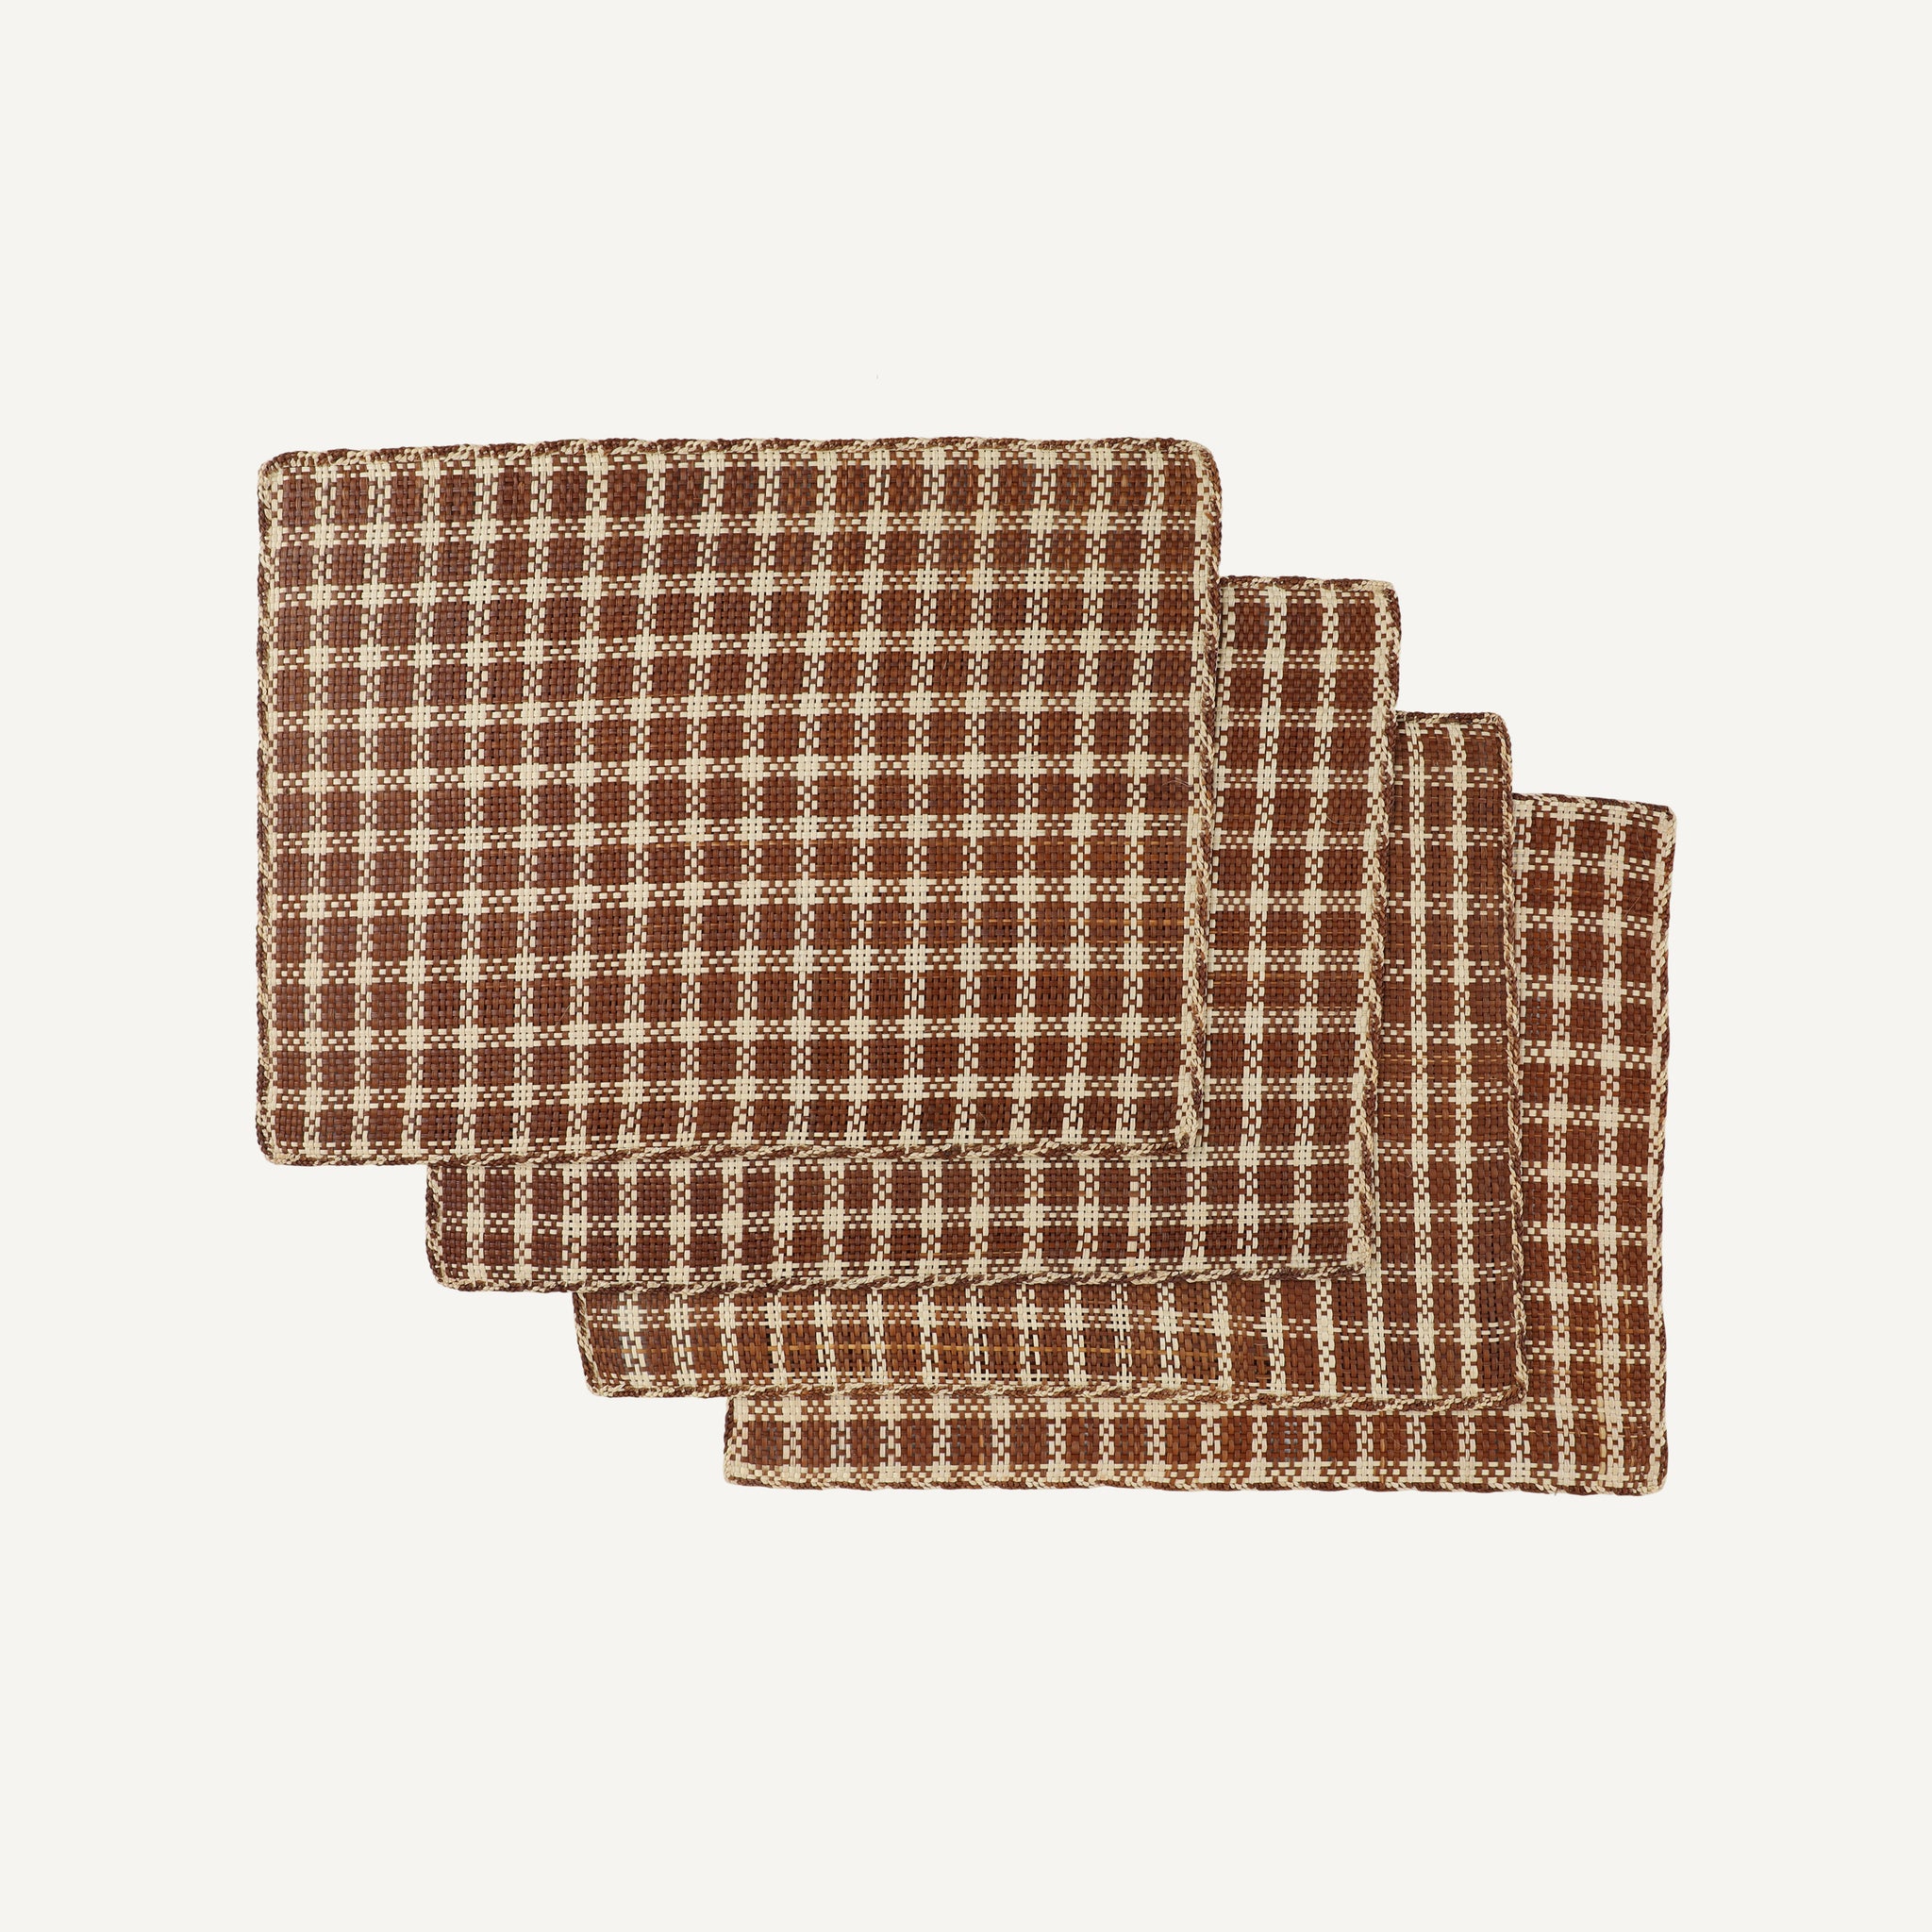 HANDWOVEN STRAW PLACEMAT